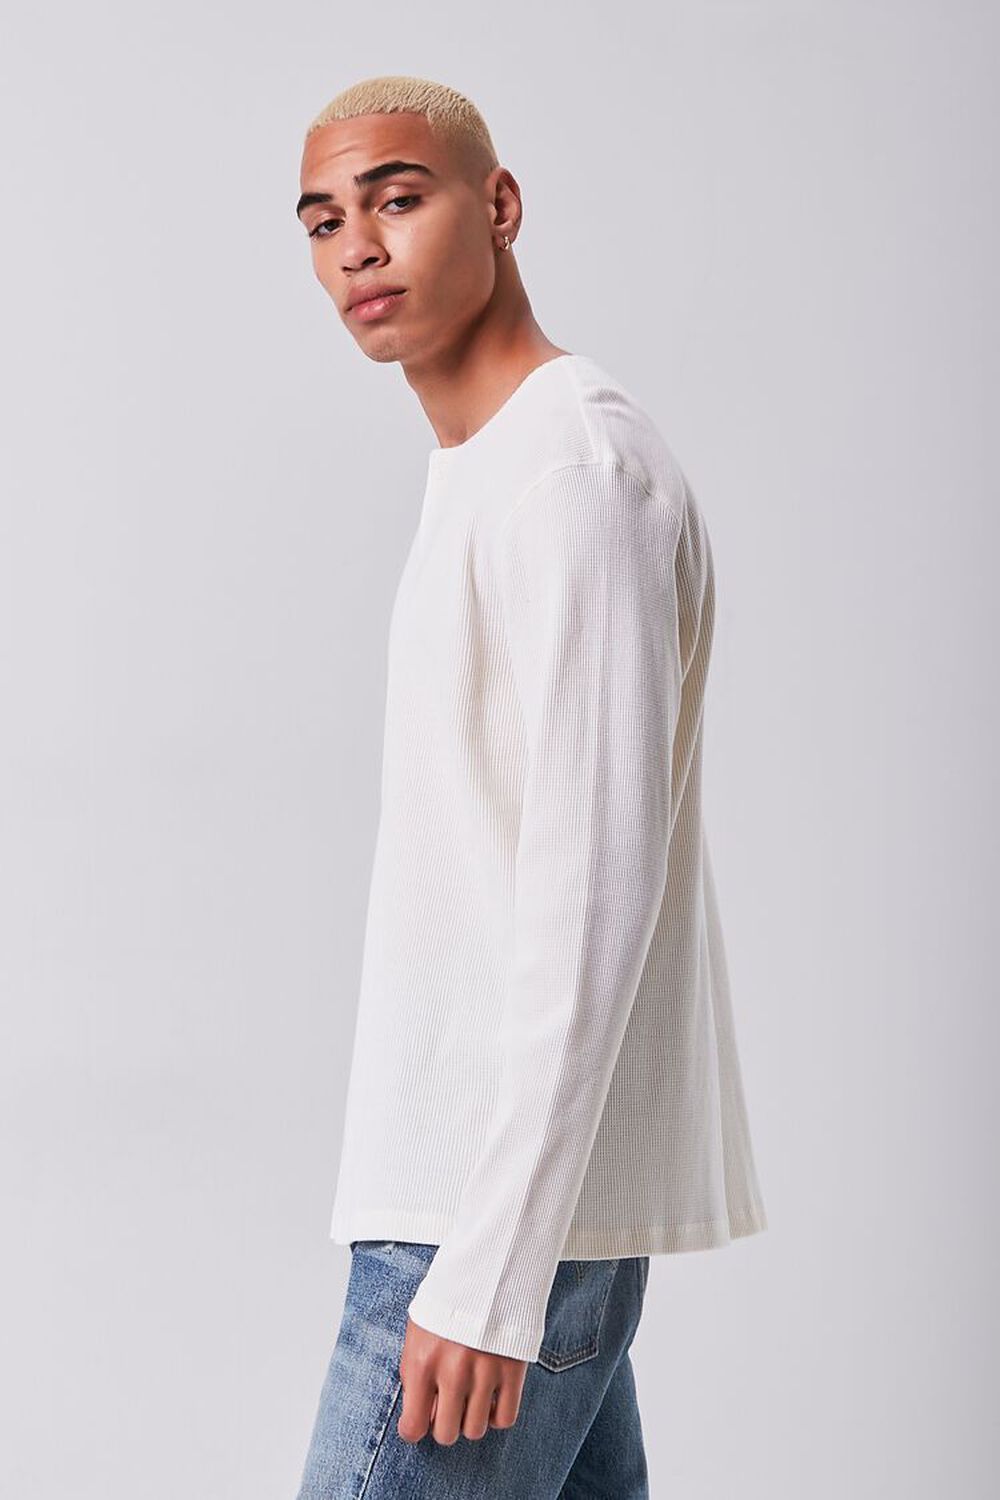 CREAM Henley Thermal Top, image 2